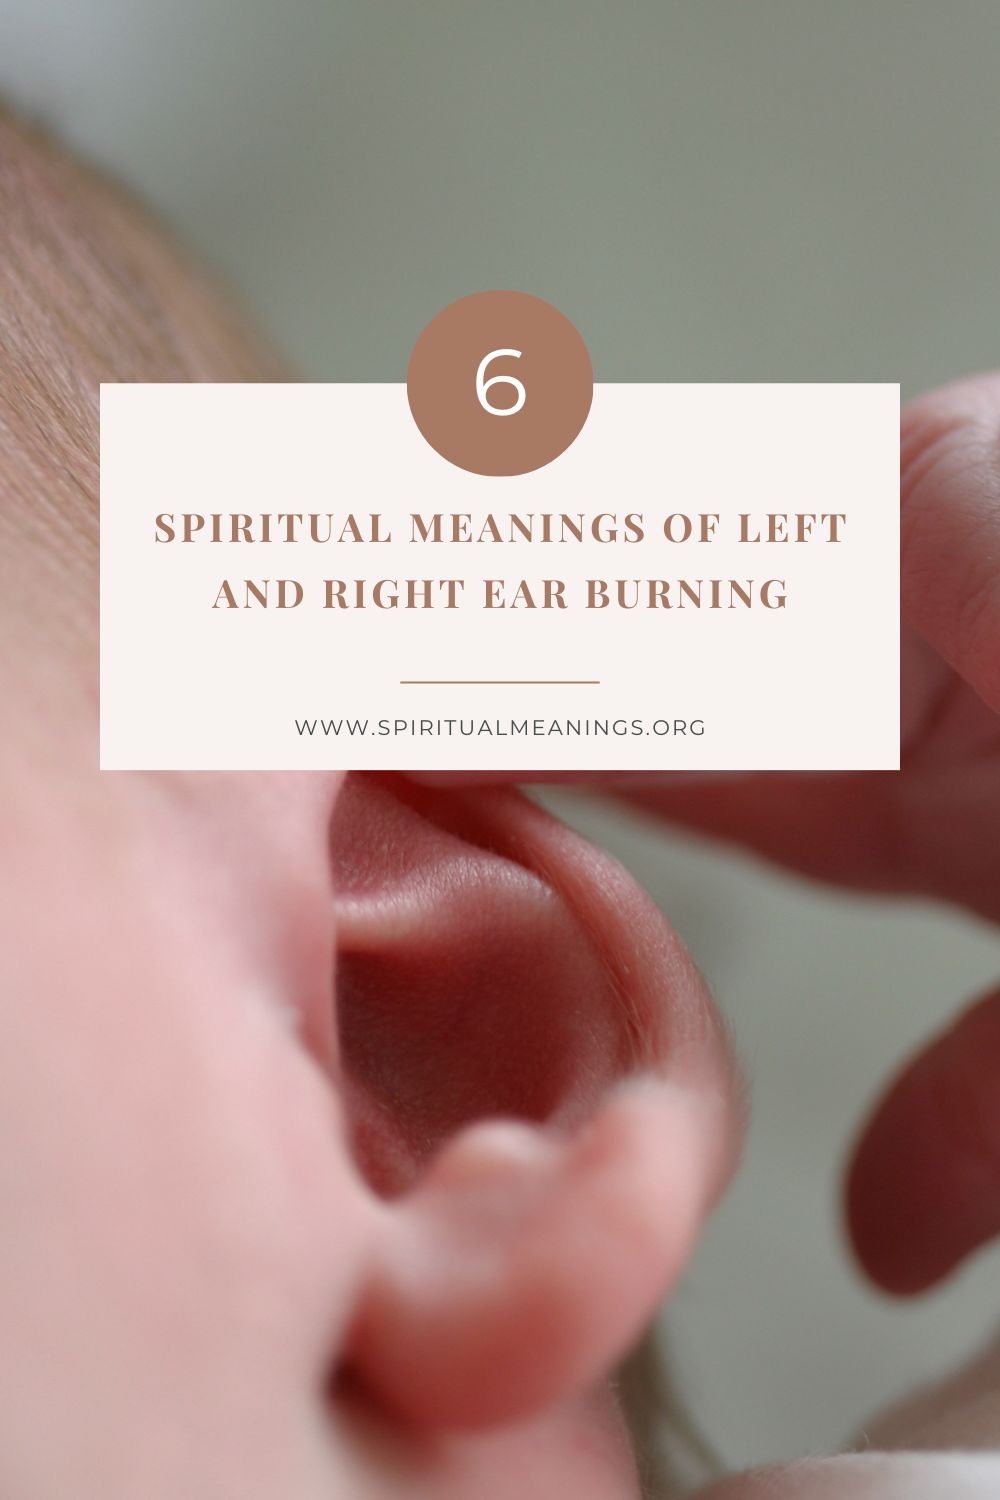 Spiritual Meanings of Left and Right Ear Burning